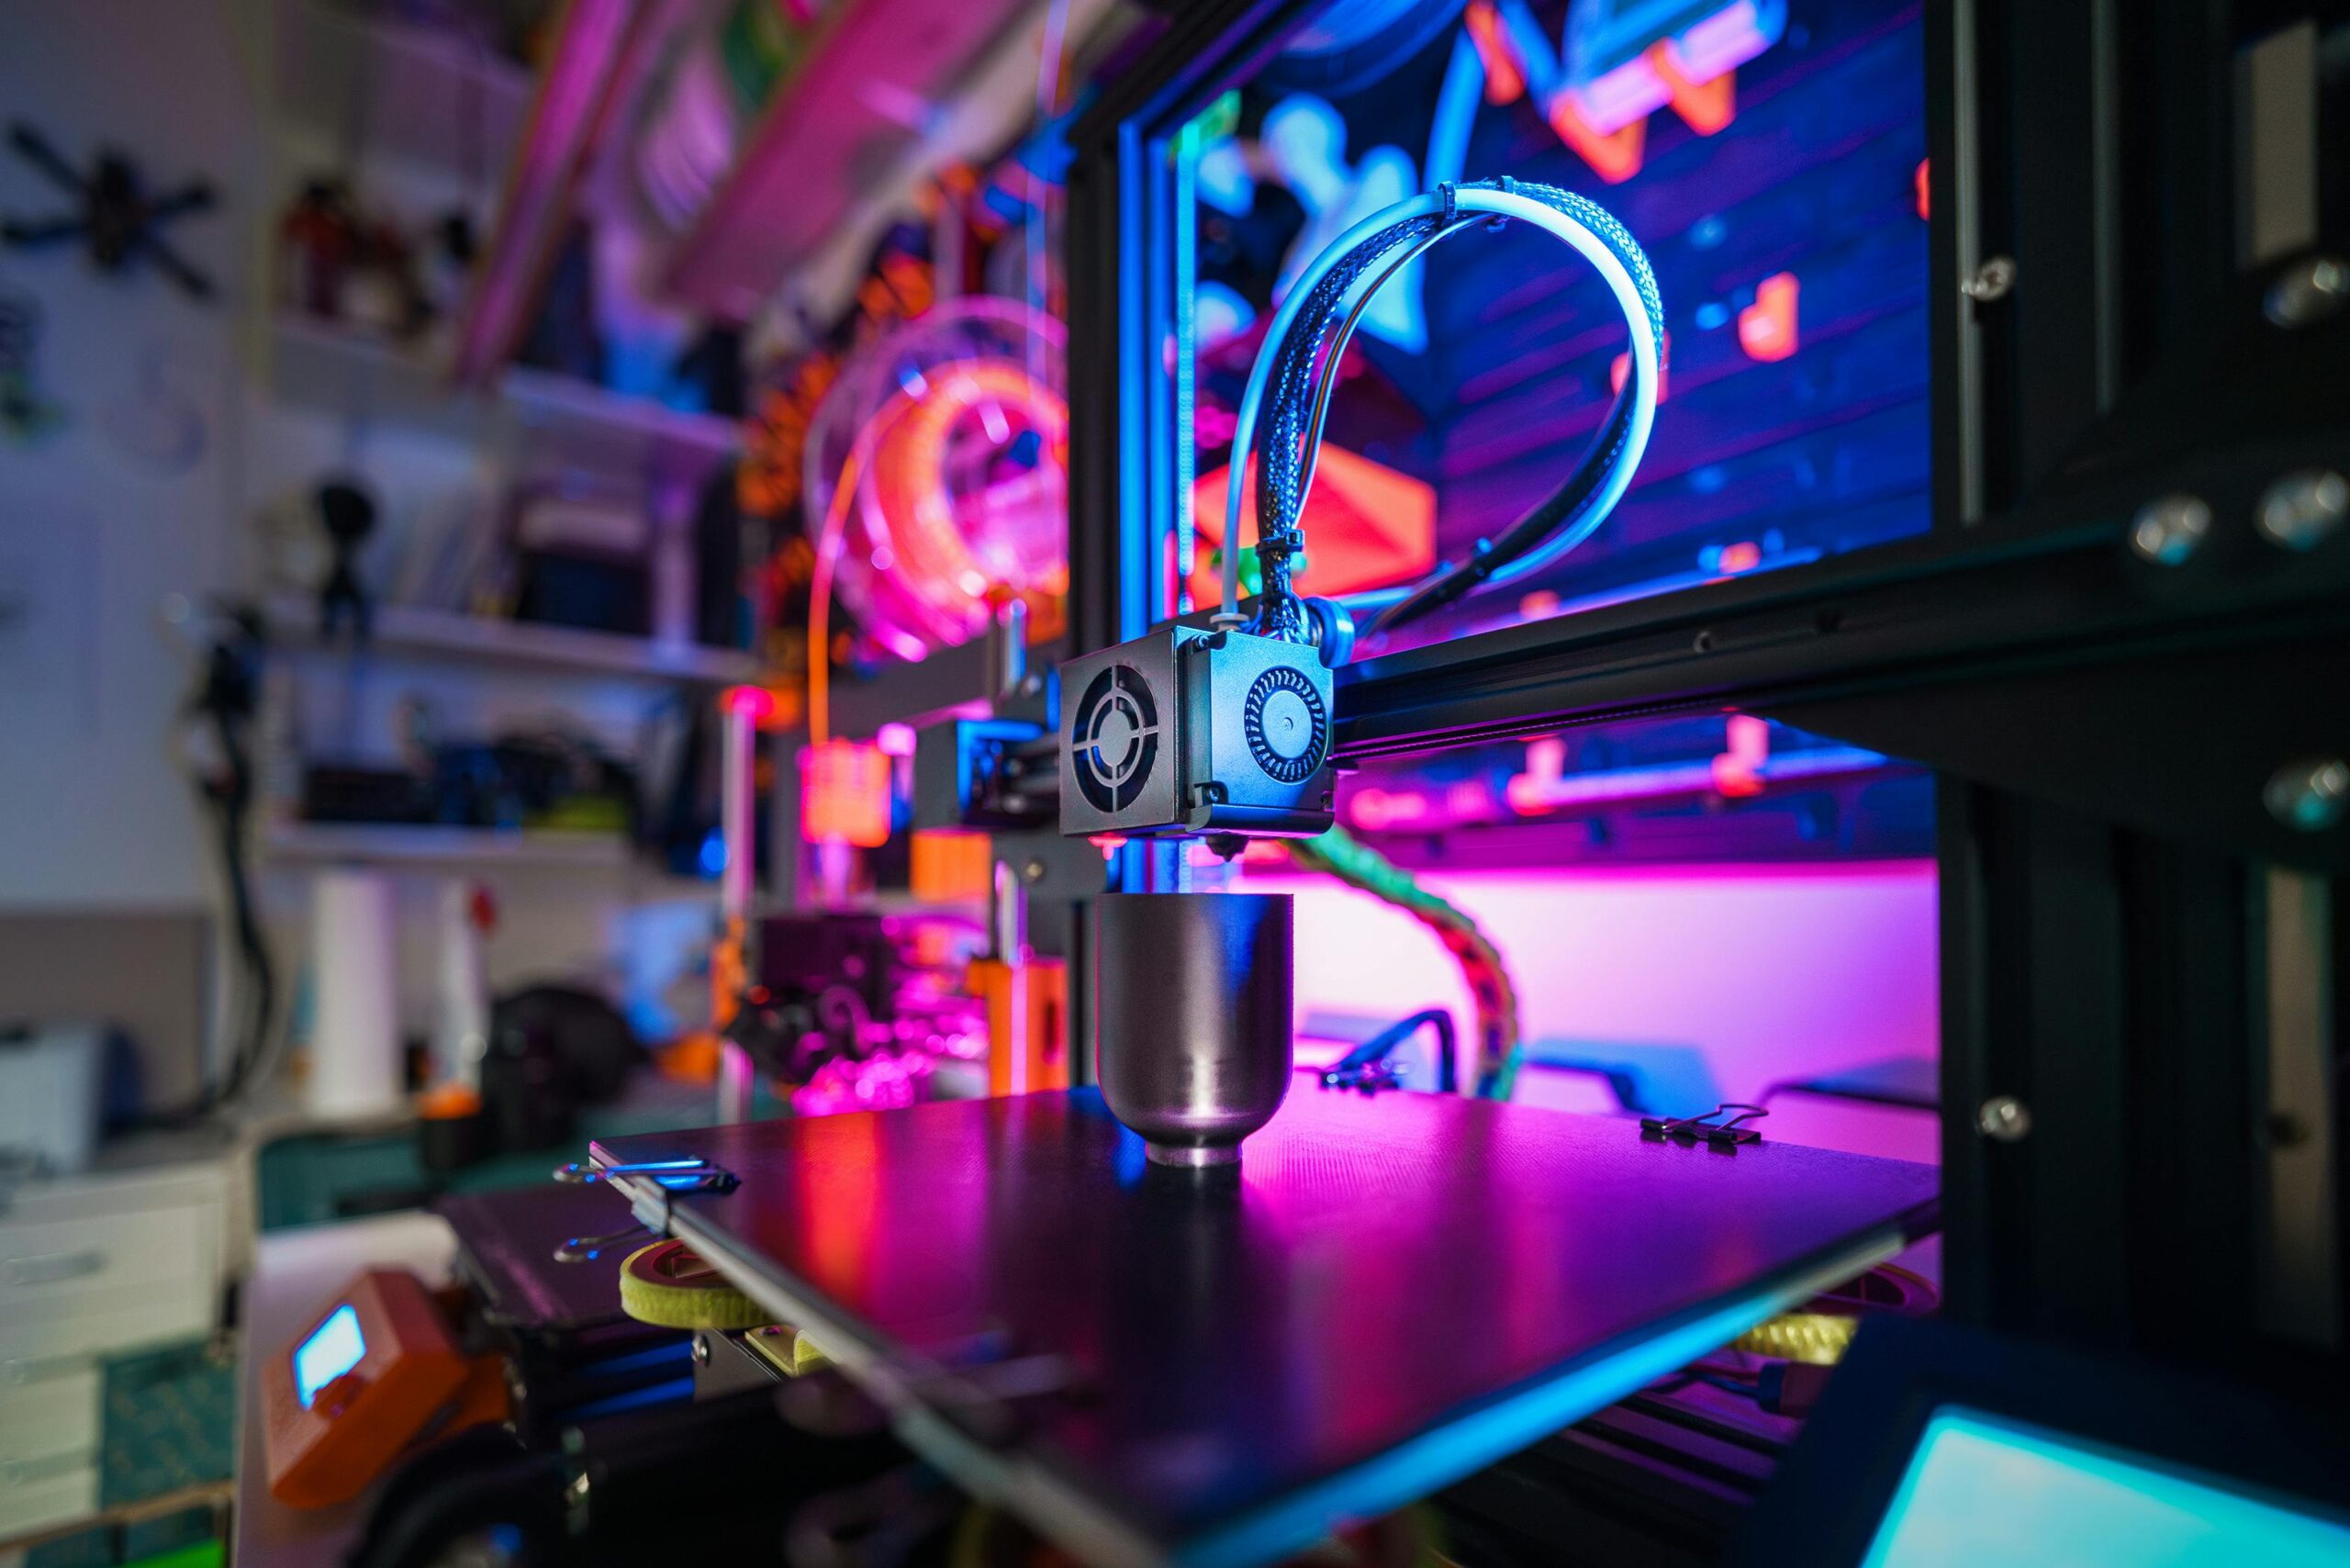 Close-up of a 3D printer's extruder in action, with neon backlighting adding a futuristic glow to the precise mechanical movements of the machine.